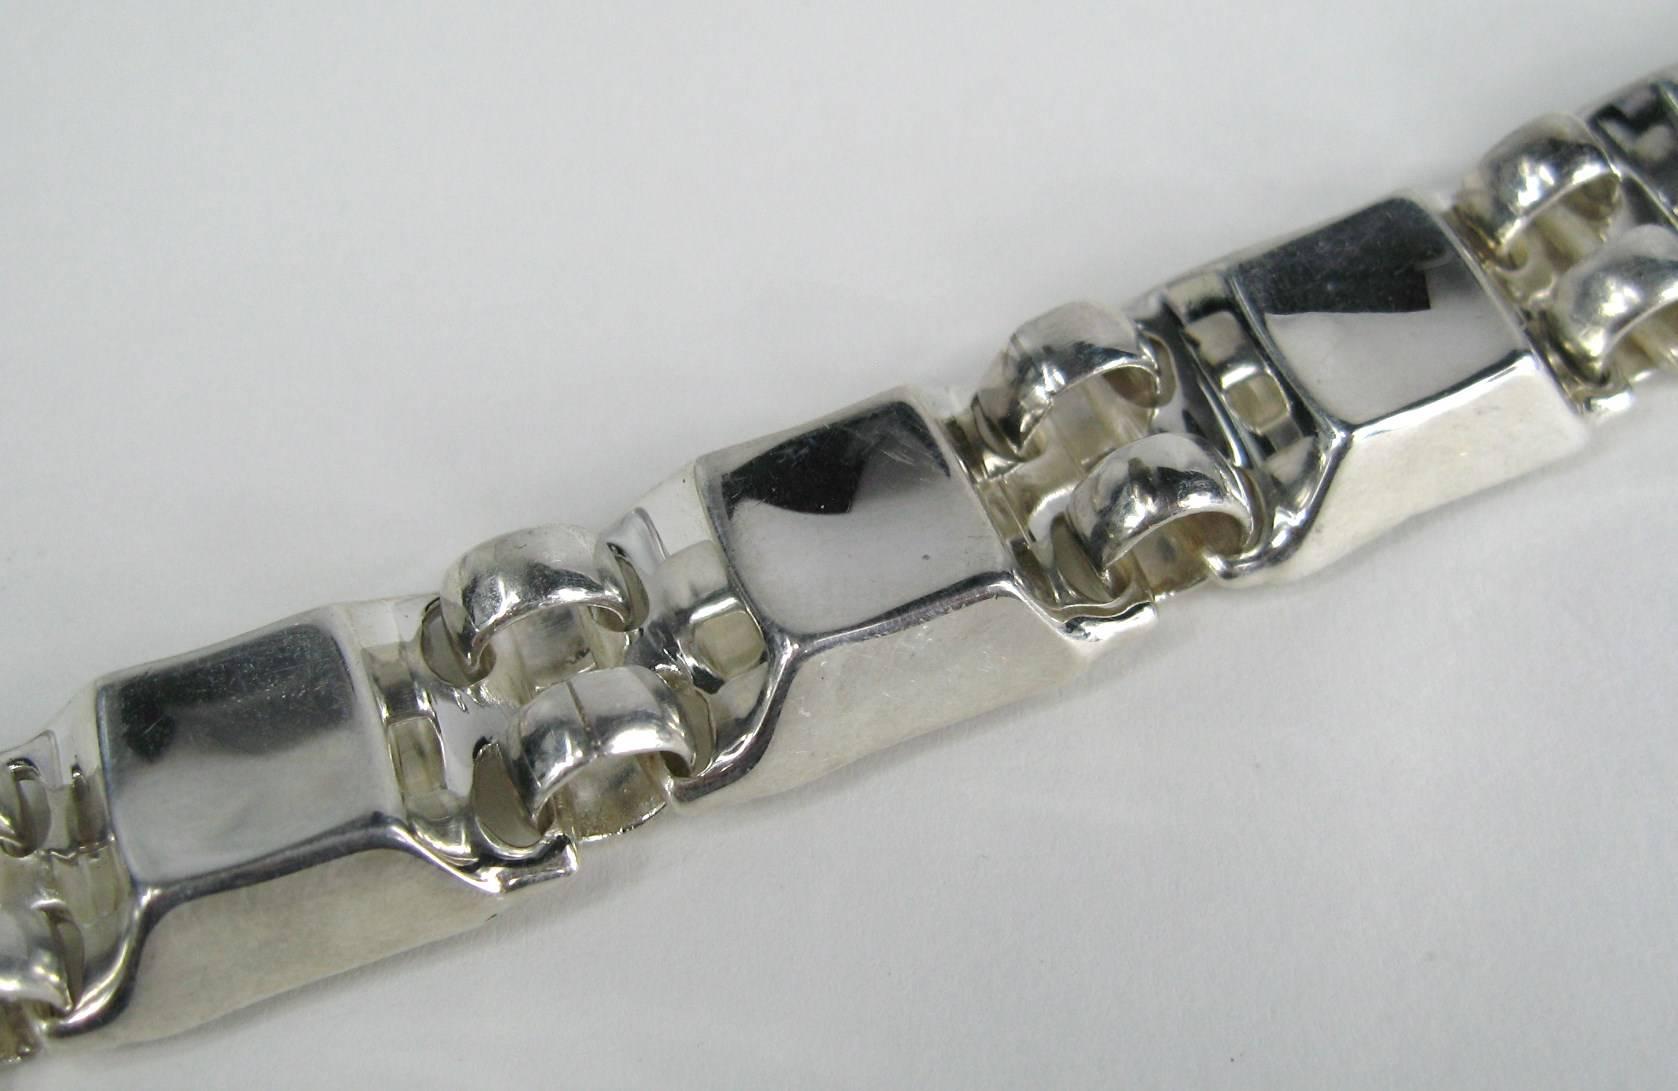 Out of a massive collection of RLM from the late 1980s early 90s New old stock never worn 
Robert Lee Morris link bracelet 
Toggle closure 
Hallmarked on the back of the bracelet 
Measuring 8